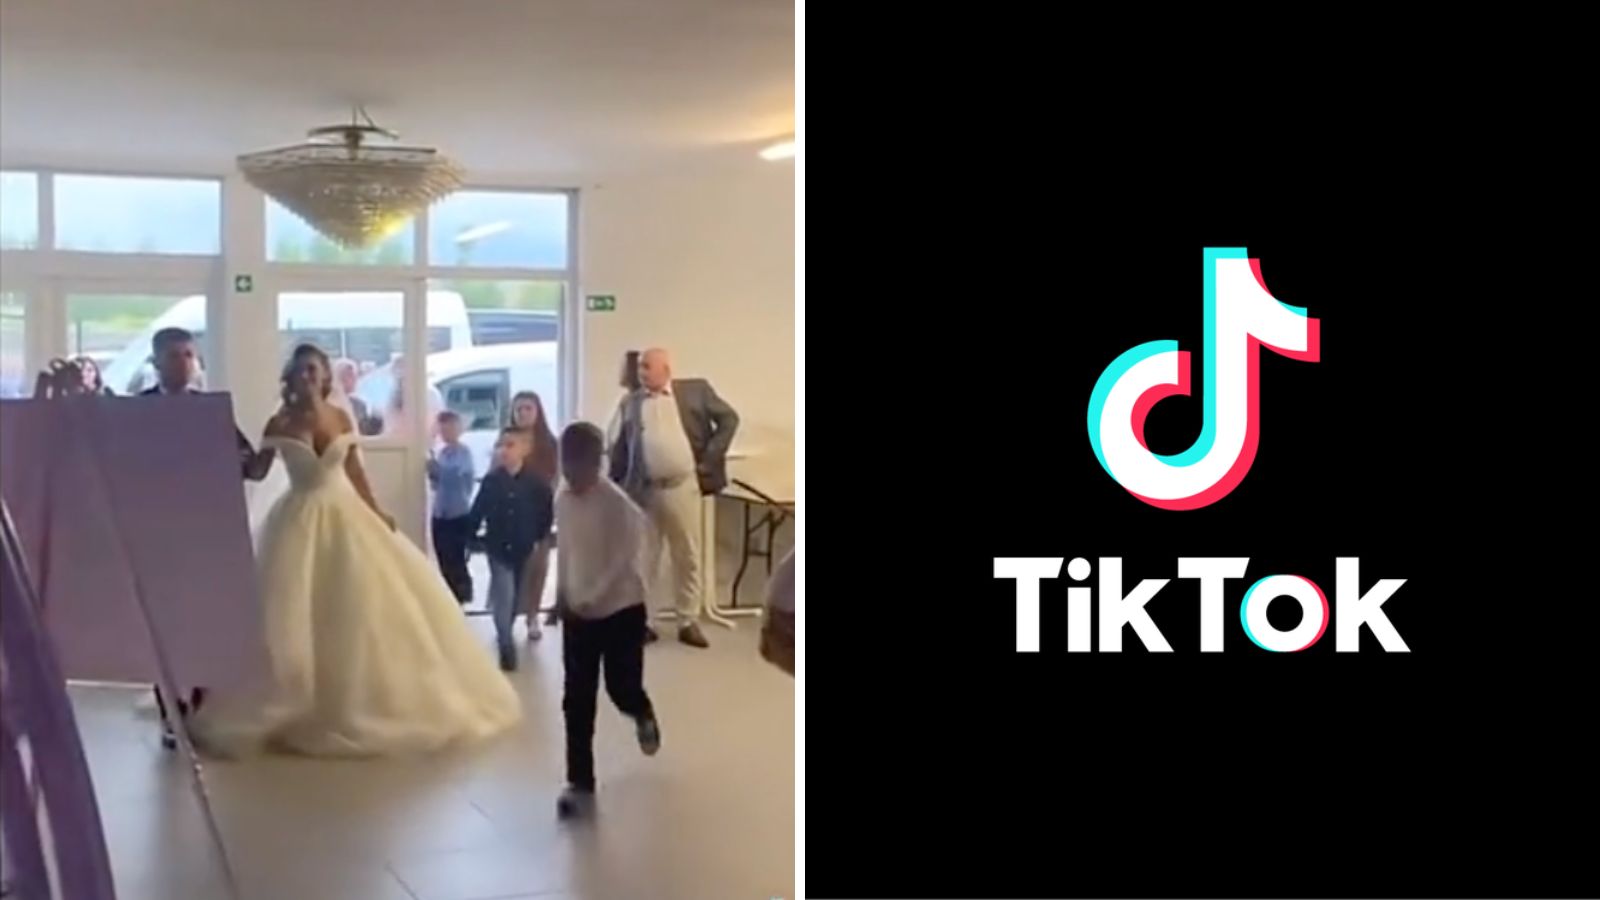 Couple’s grand wedding entrance ‘ruined’ by kids in viral TikTok